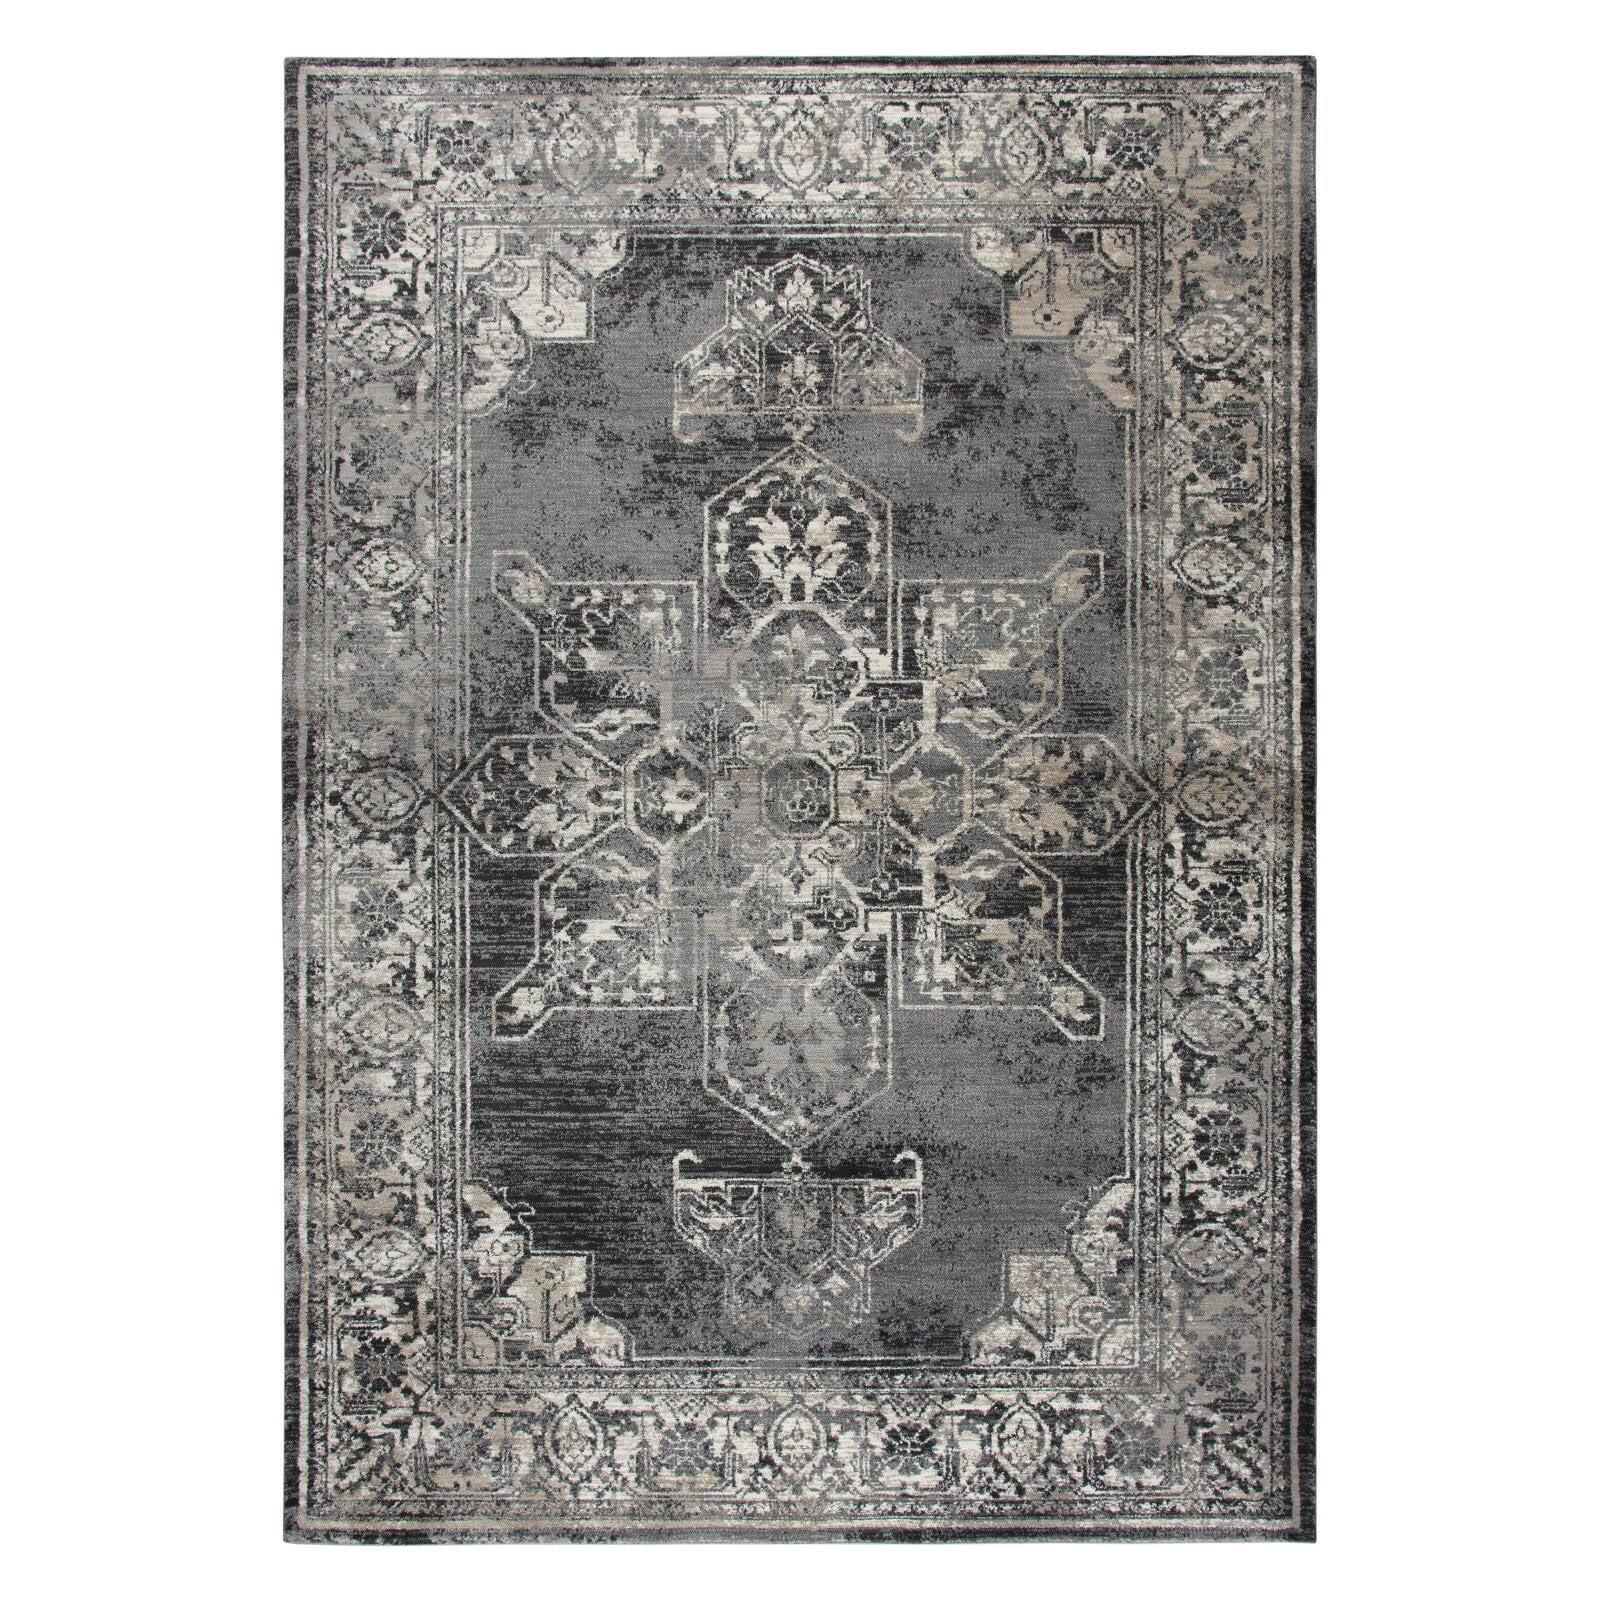 Transitional Gray and Taupe Wool Blend 8' x 10' Area Rug